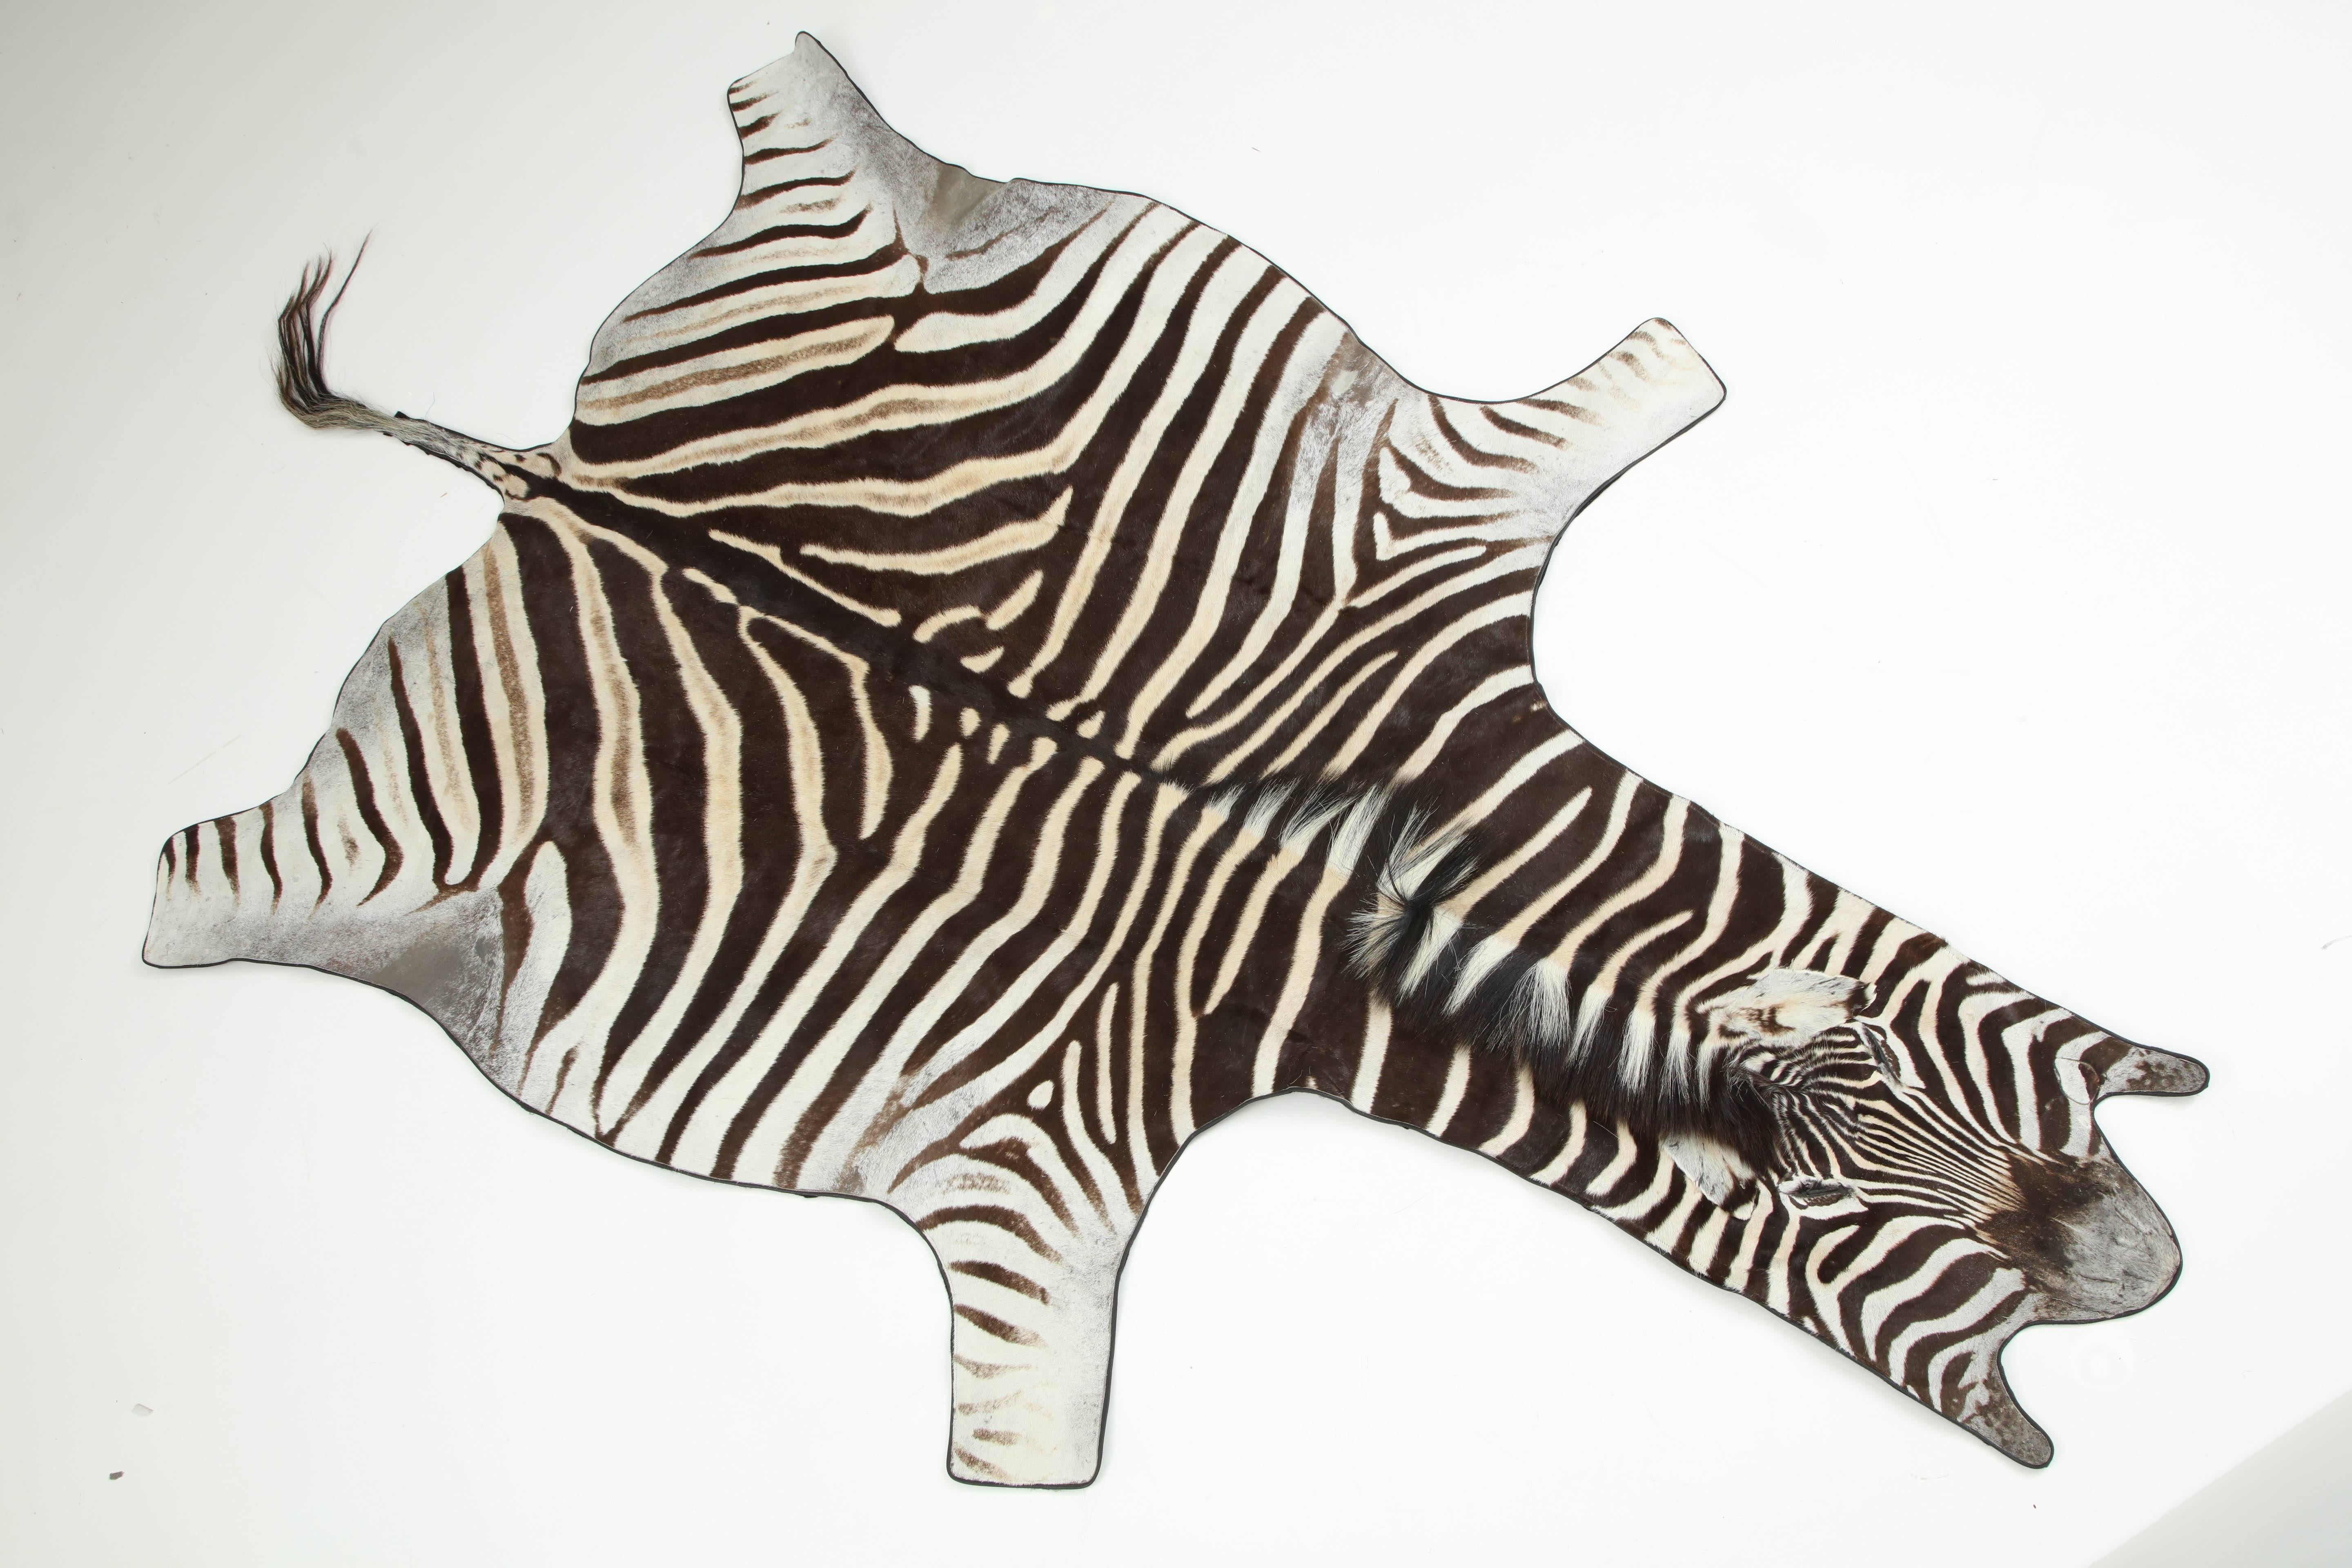 Zebra rug from South Africa.